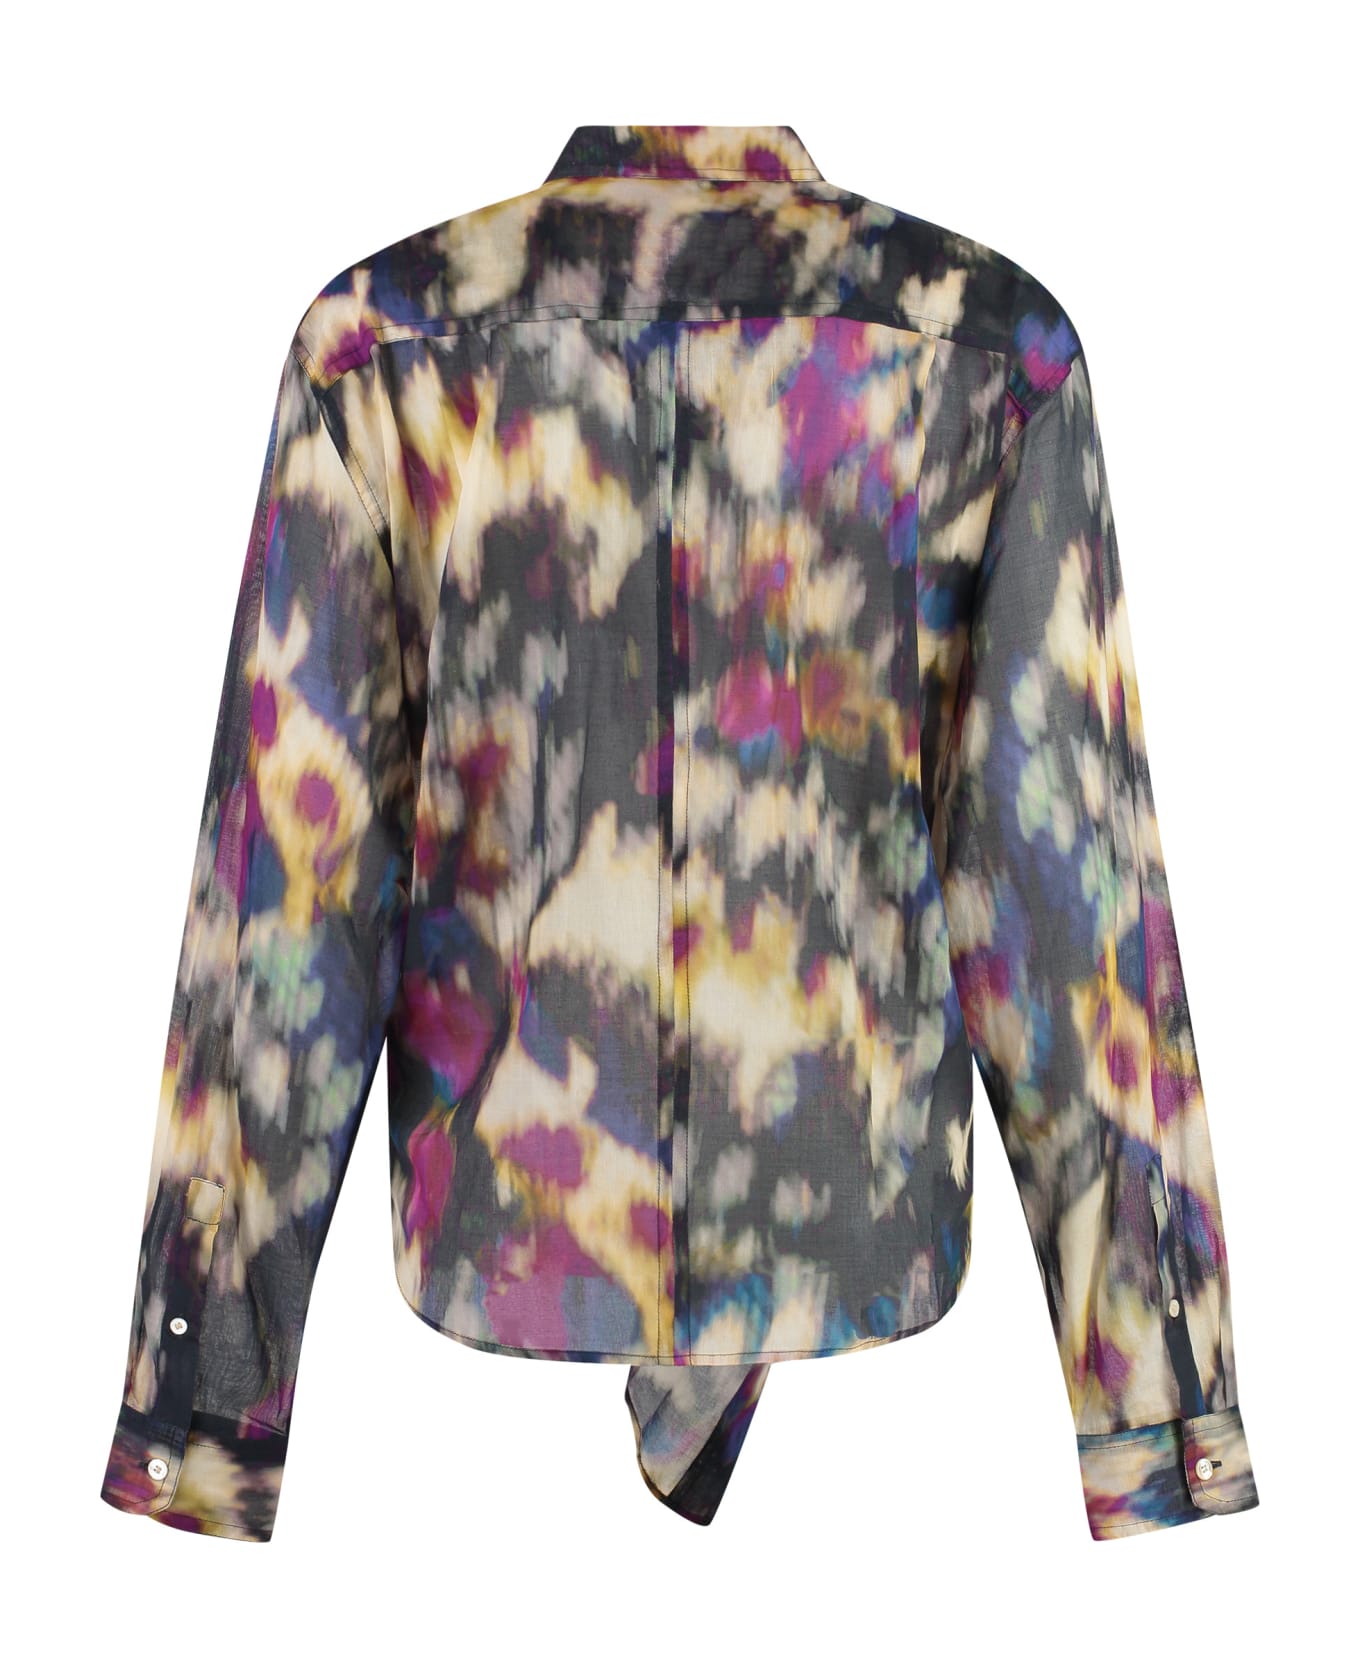 Marant Étoile Nath Tie-dyed Buttoned Shirt - Multicolor ブラウス